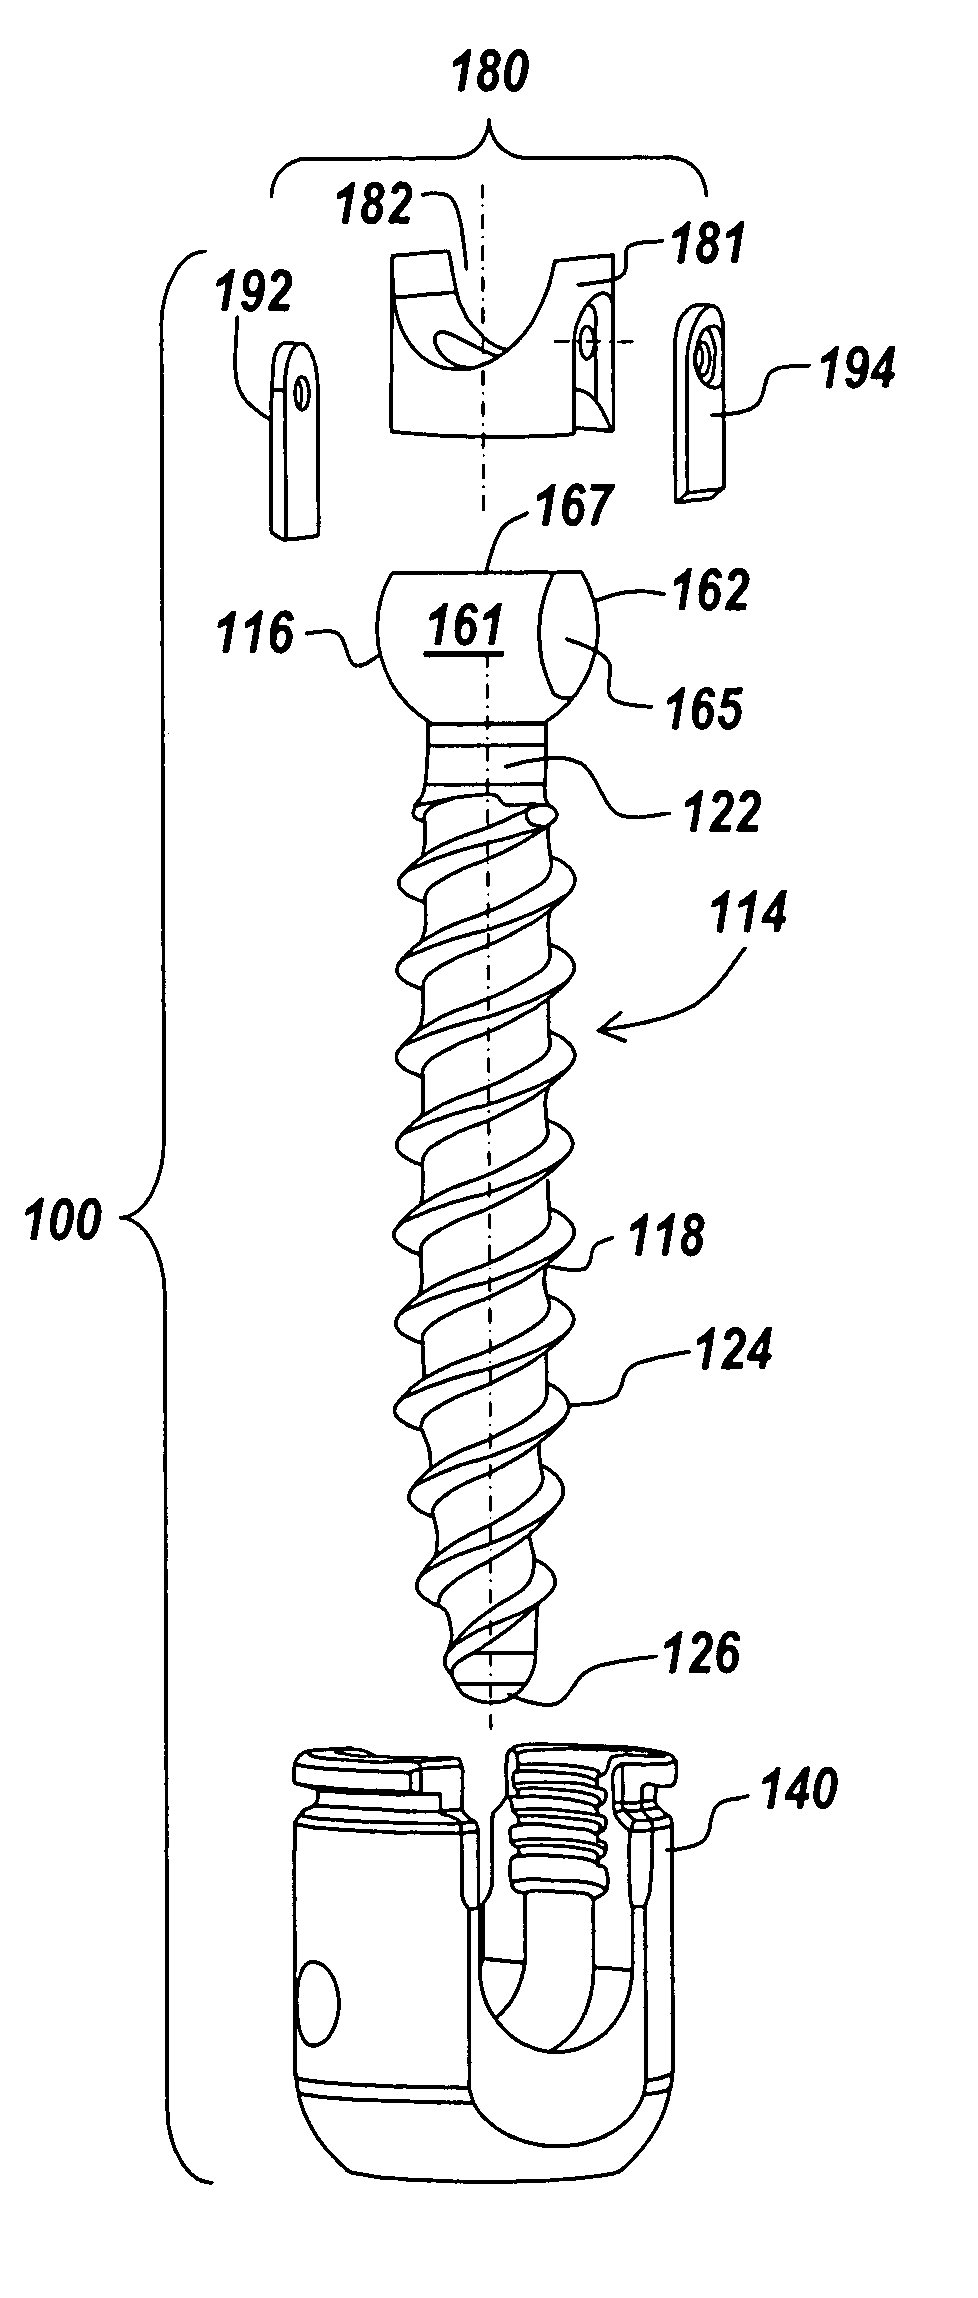 Constrained motion bone screw assembly